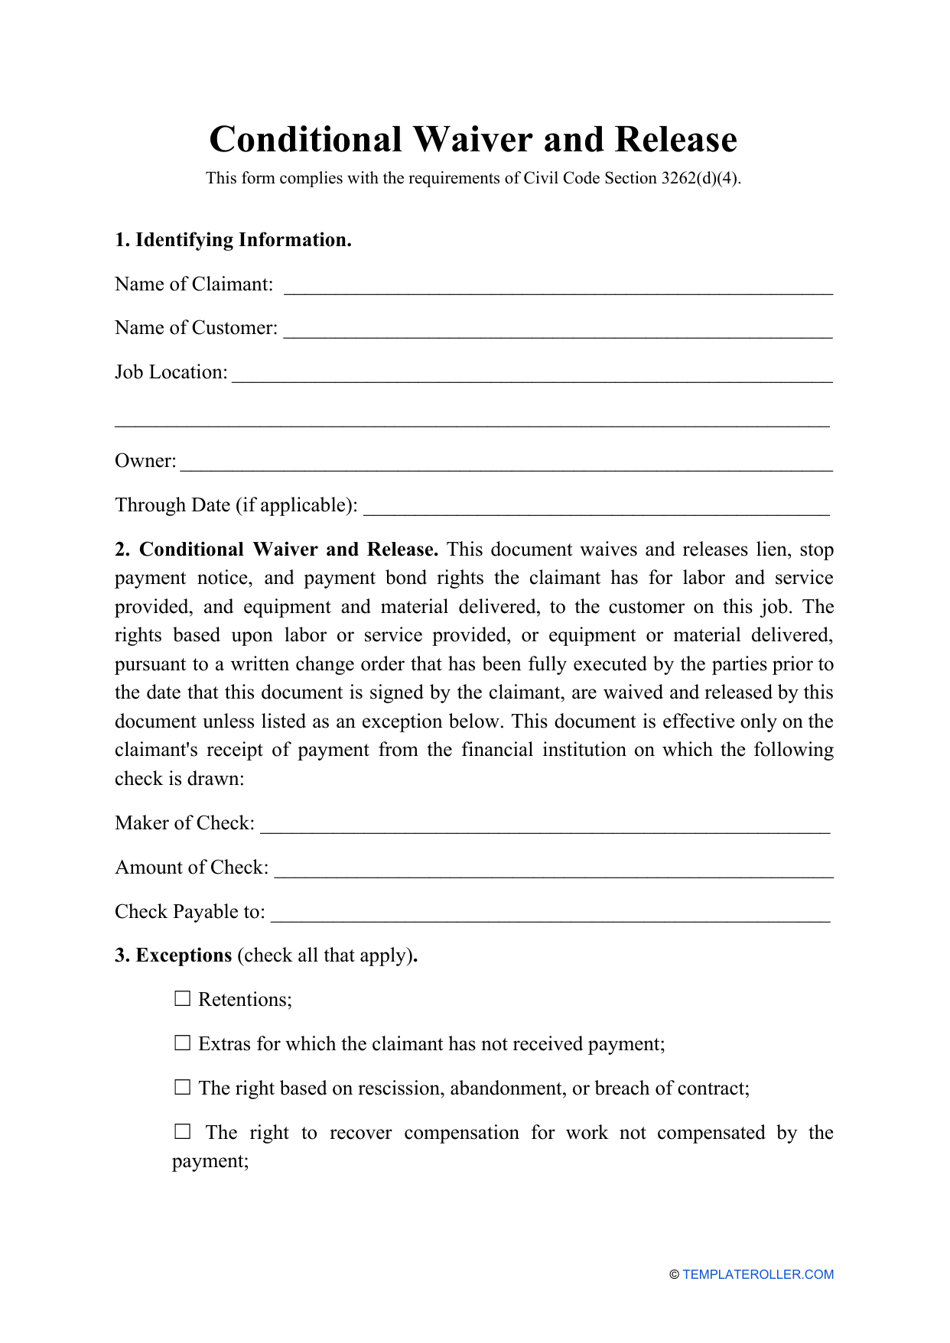 conditional-waiver-and-release-form-download-printable-pdf-templateroller